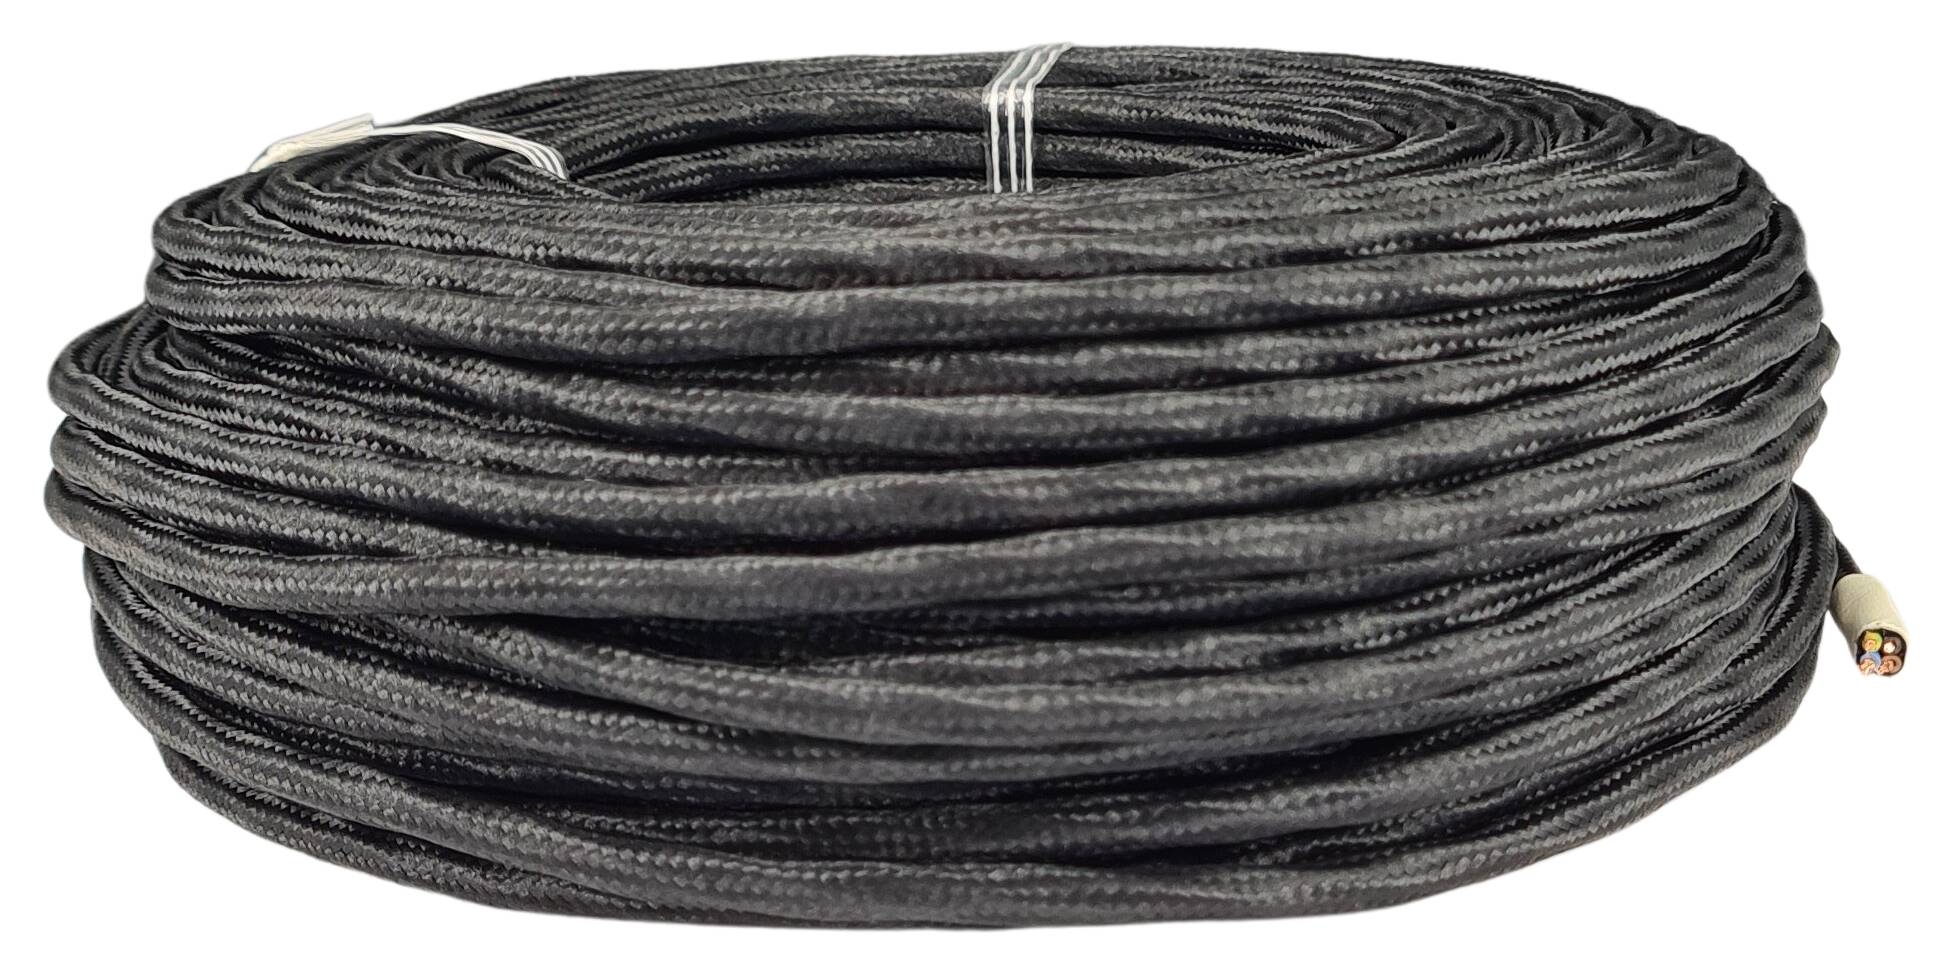 stranded cable 4G 0,75 twisted and textile braided RAL 9005 black